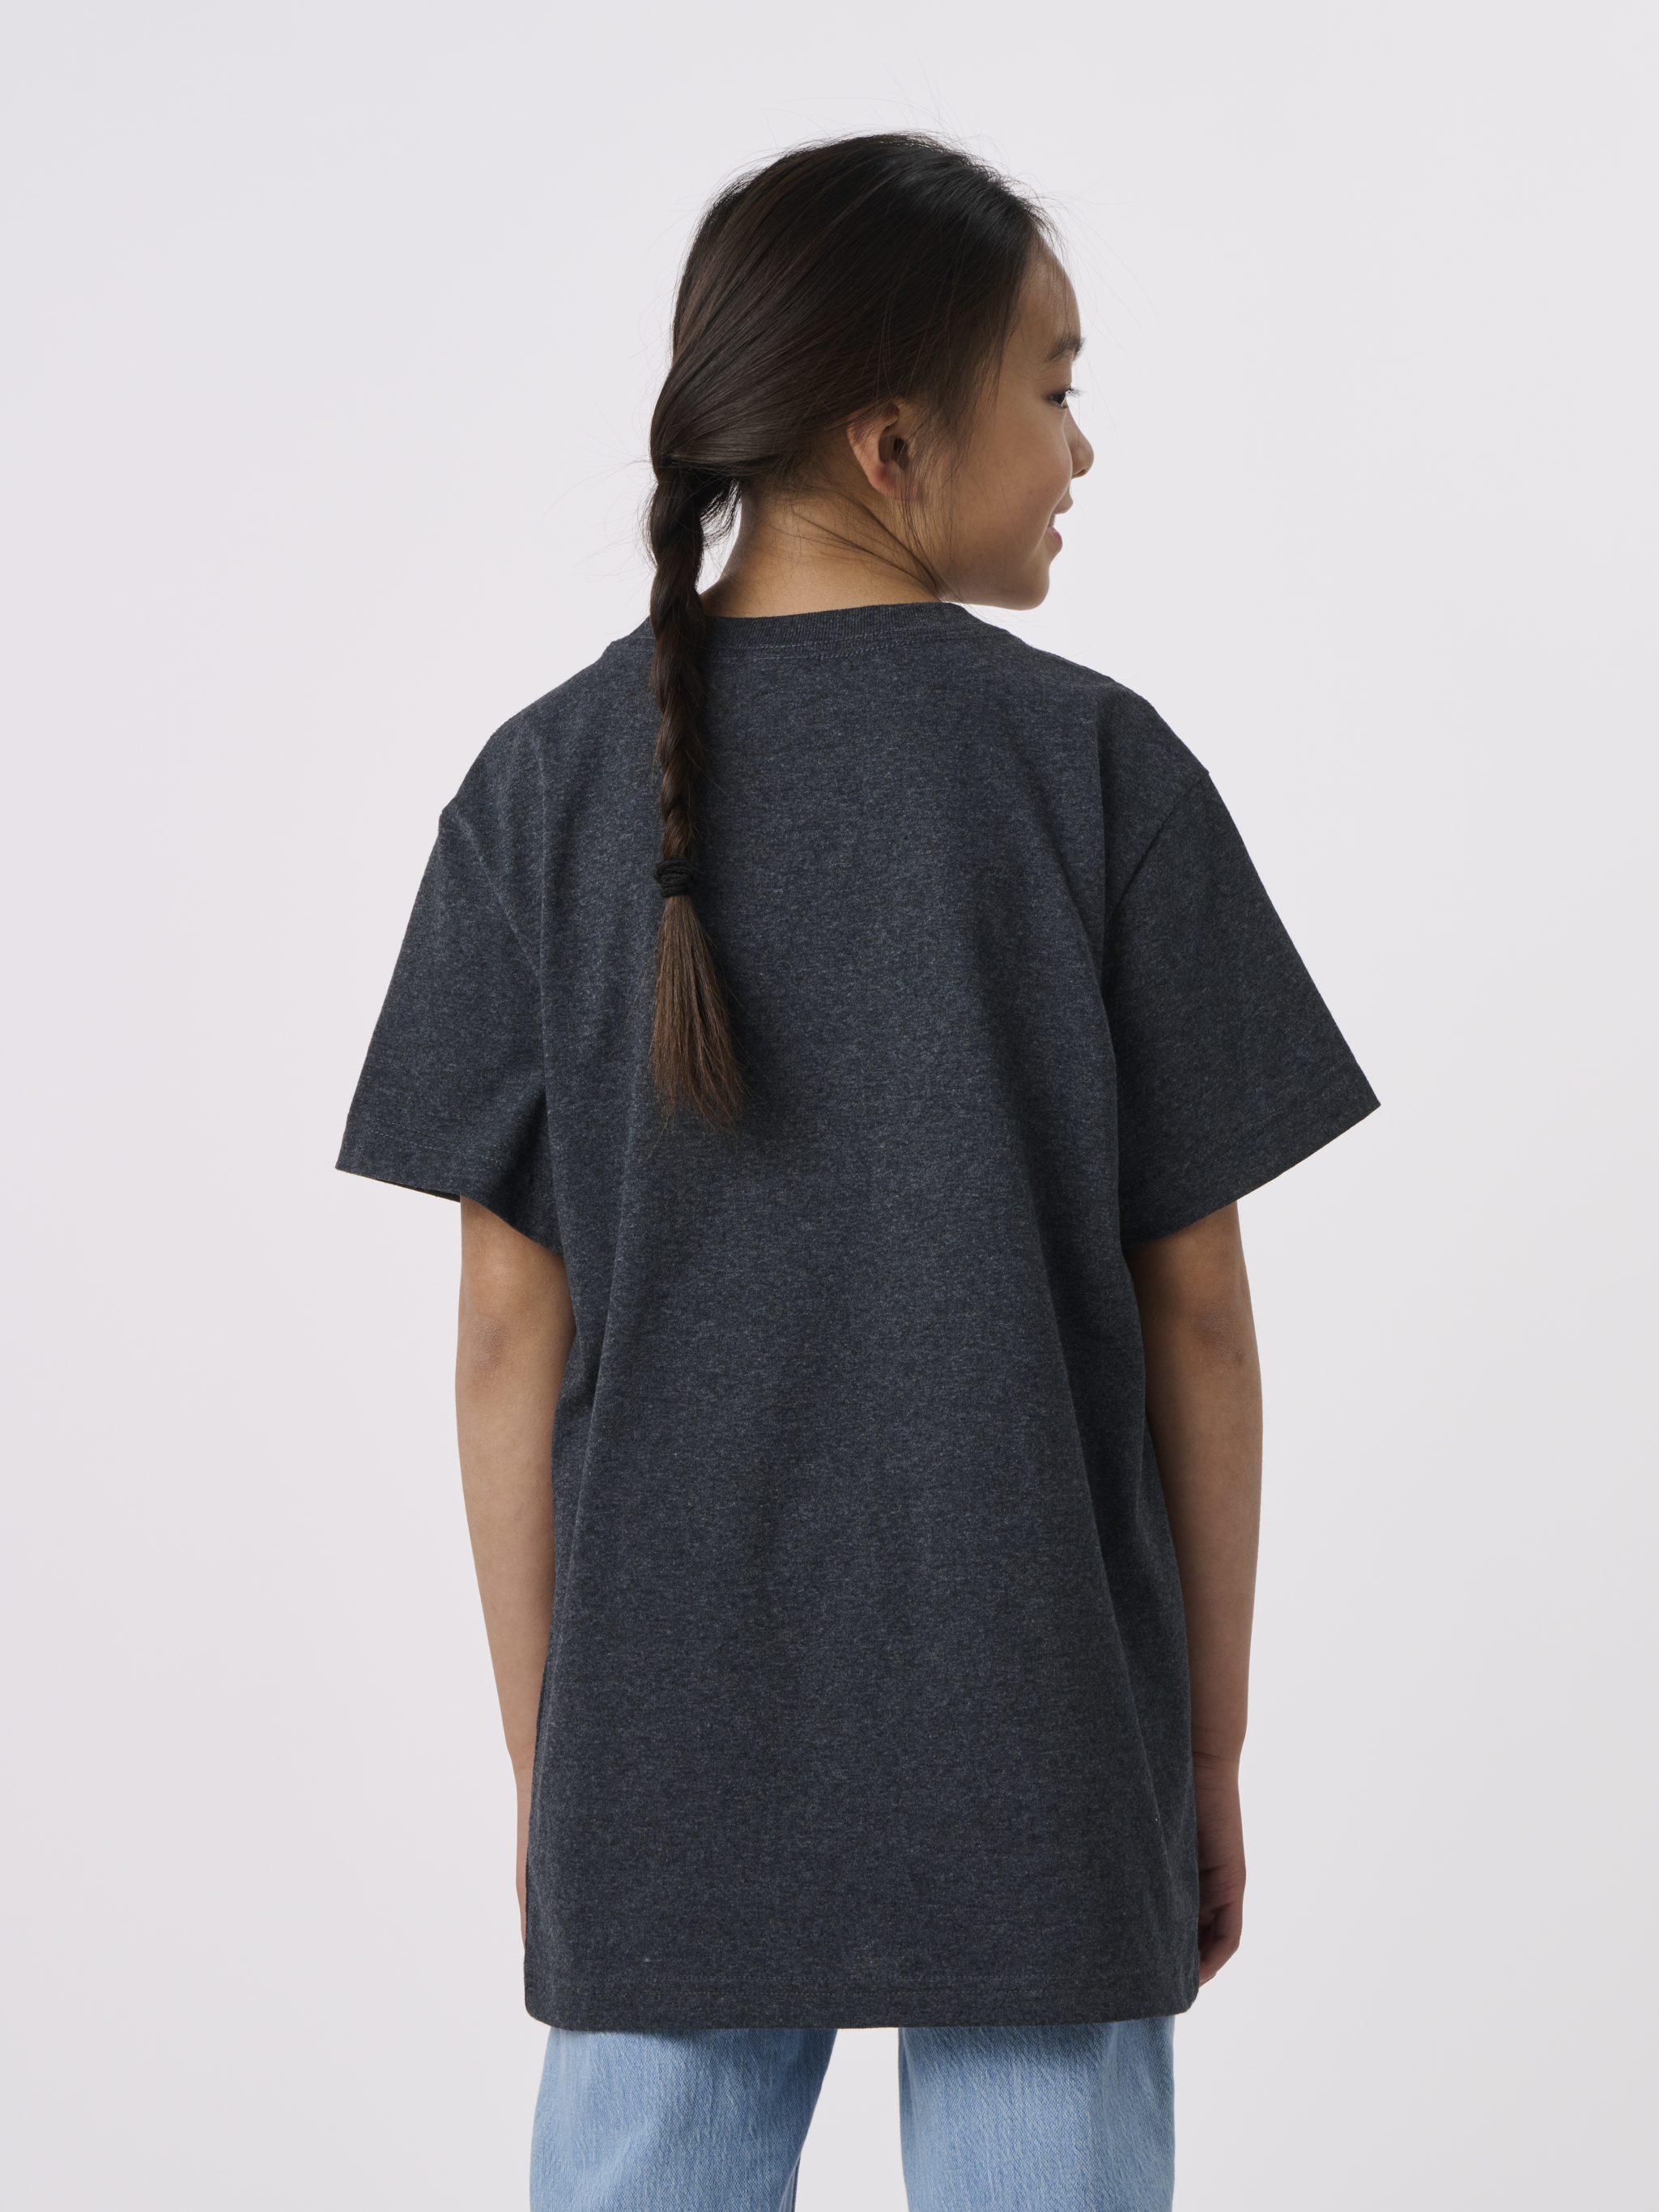 RECOVER_EY100_ECOYOUTHSHORTSLEEVETSHIRT_CHARCOAL_BACK.png